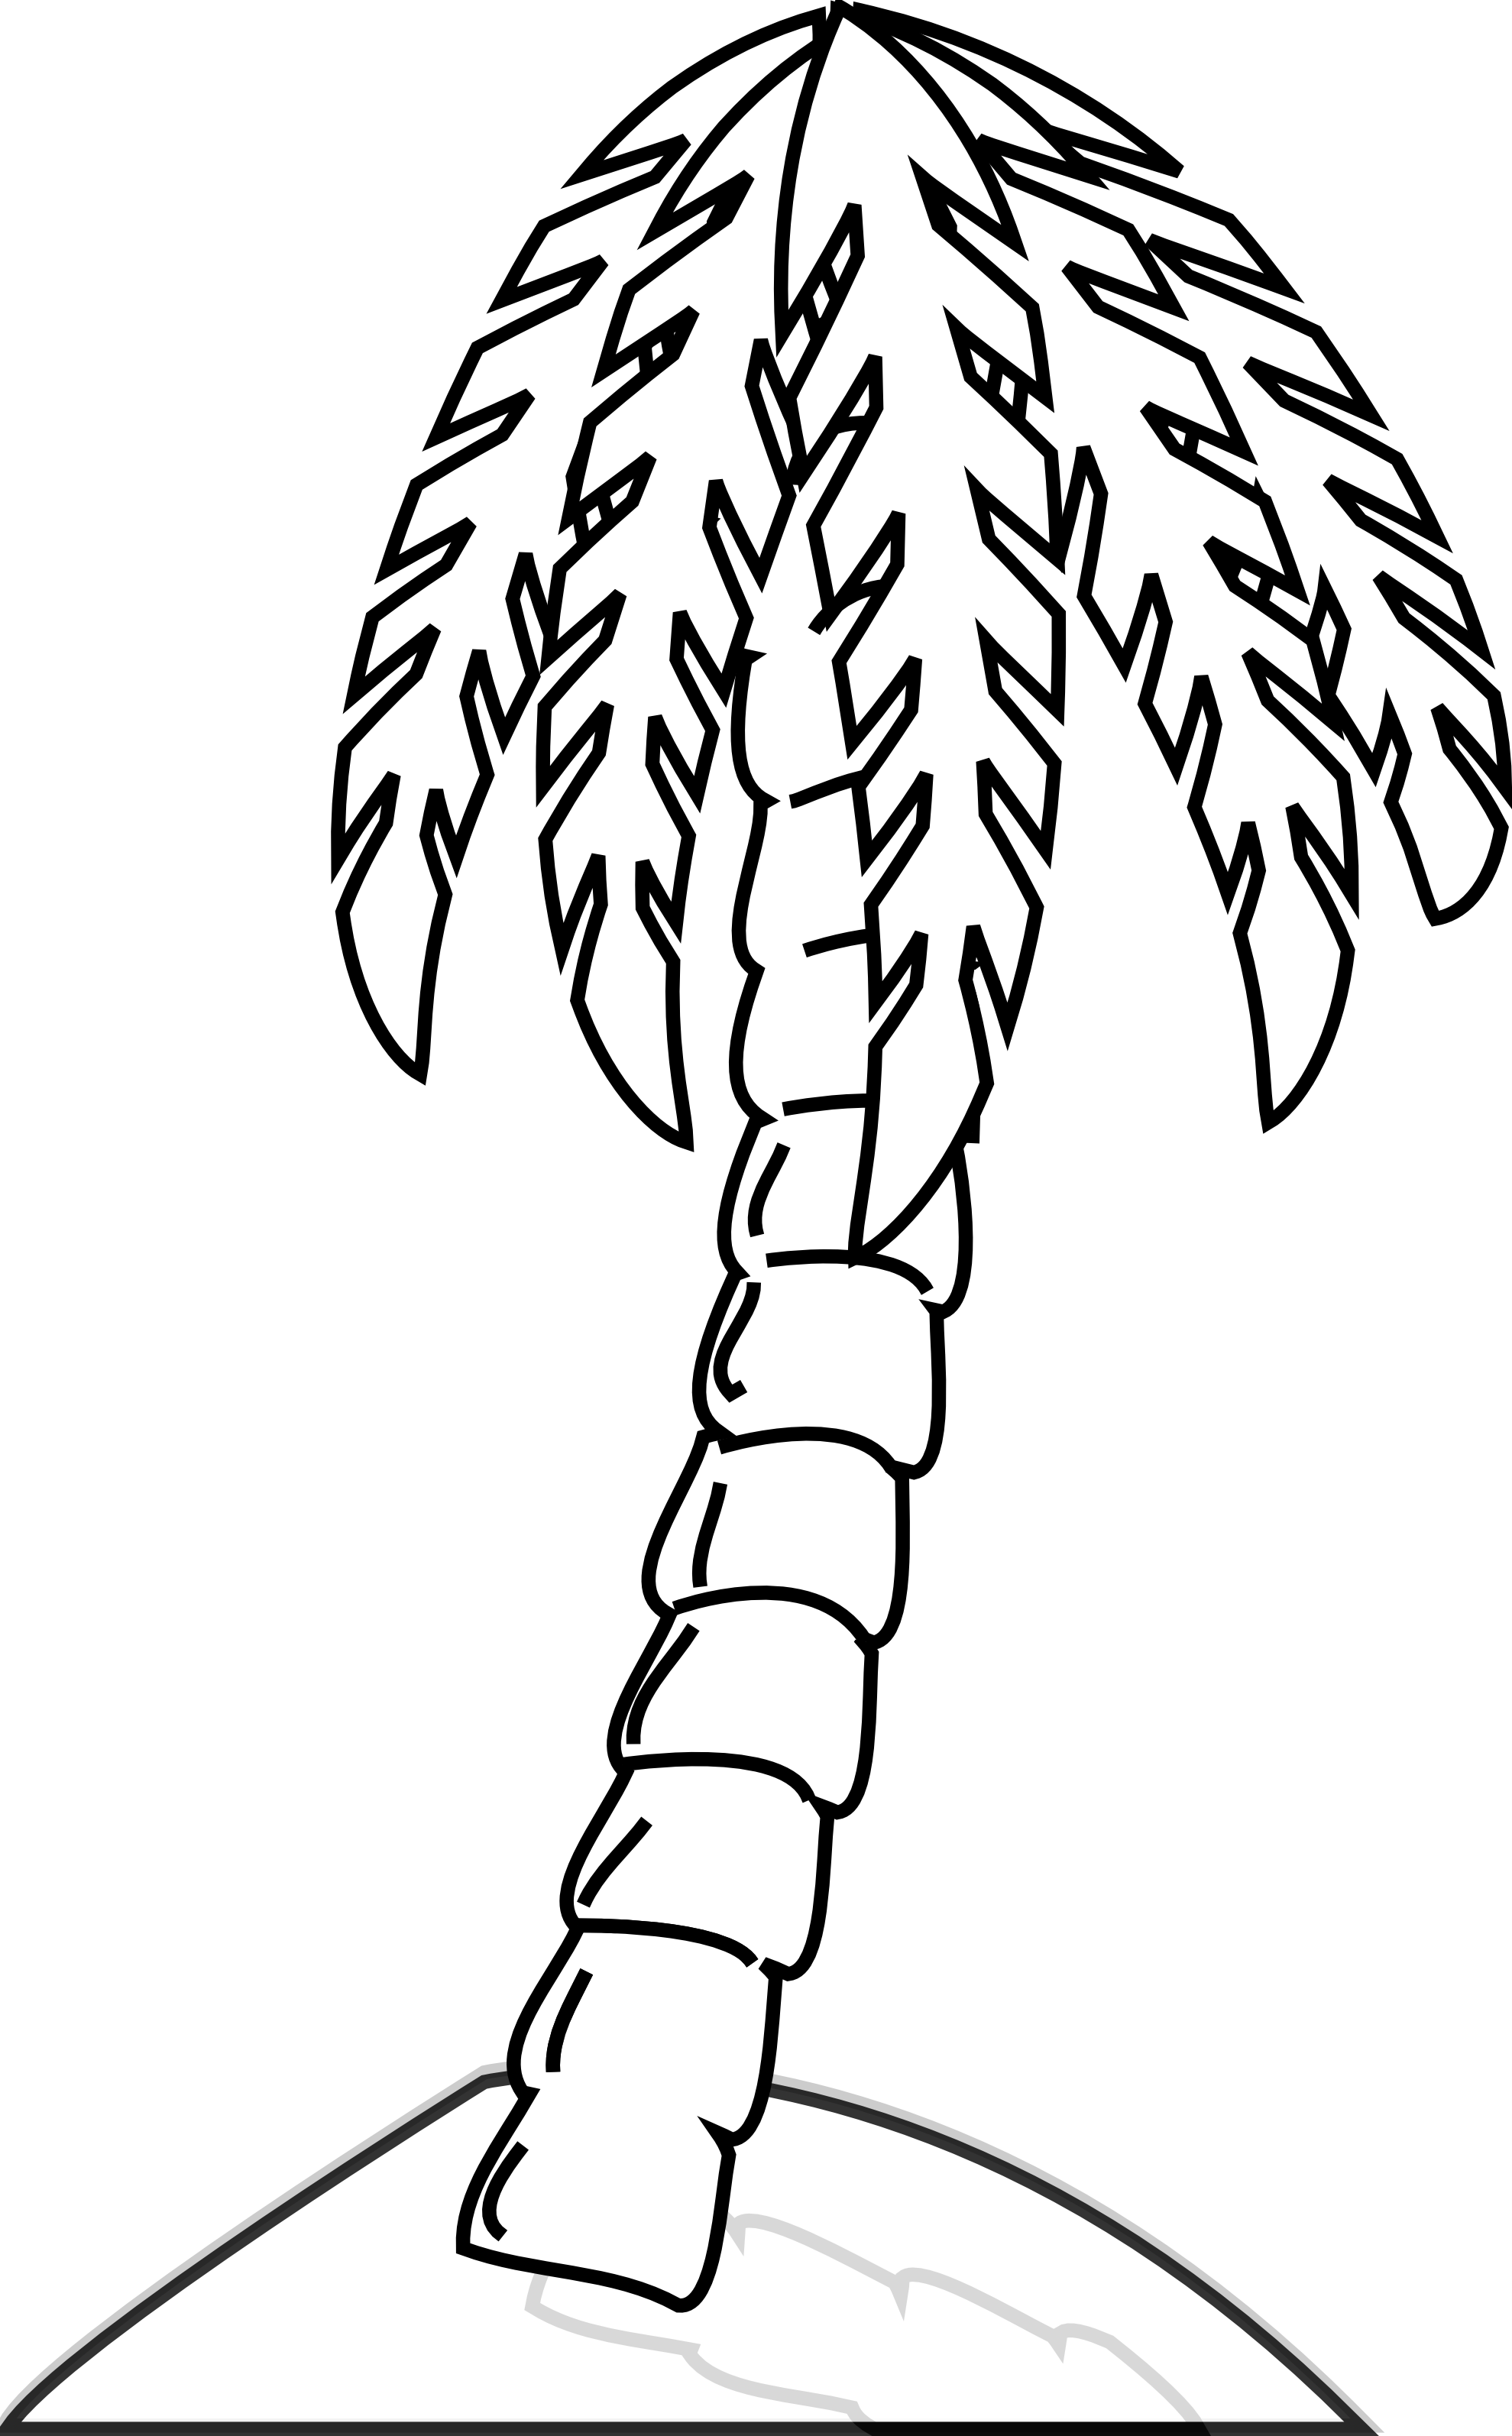 Palm Tree Clipart Black And White - Clipart Of Date Trees Black And White (1979x3188)